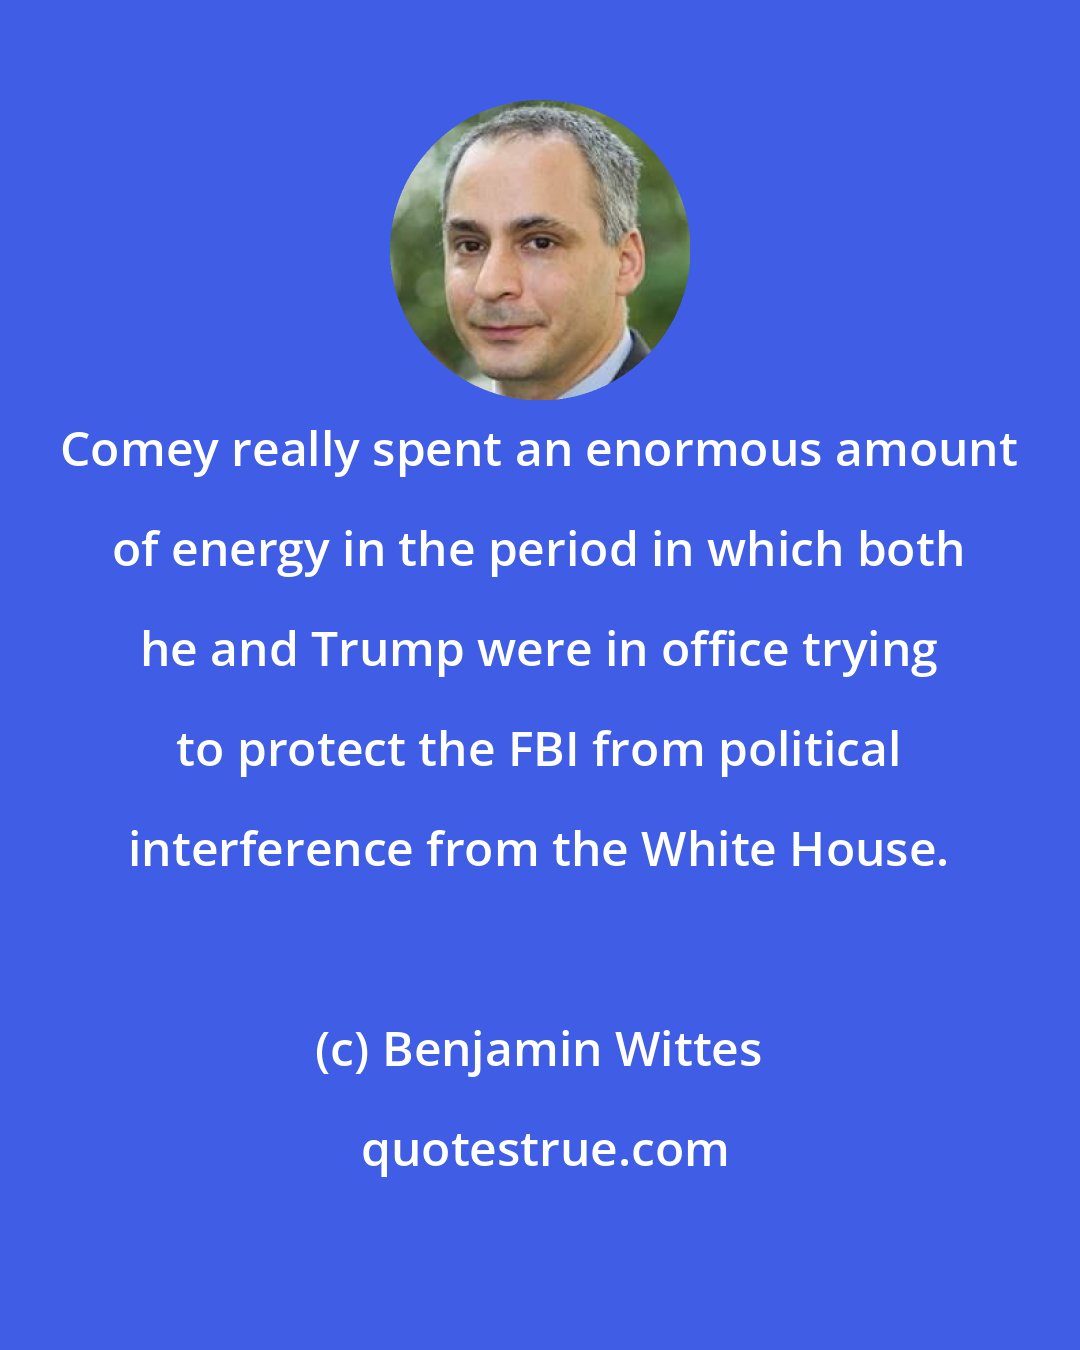 Benjamin Wittes: Comey really spent an enormous amount of energy in the period in which both he and Trump were in office trying to protect the FBI from political interference from the White House.